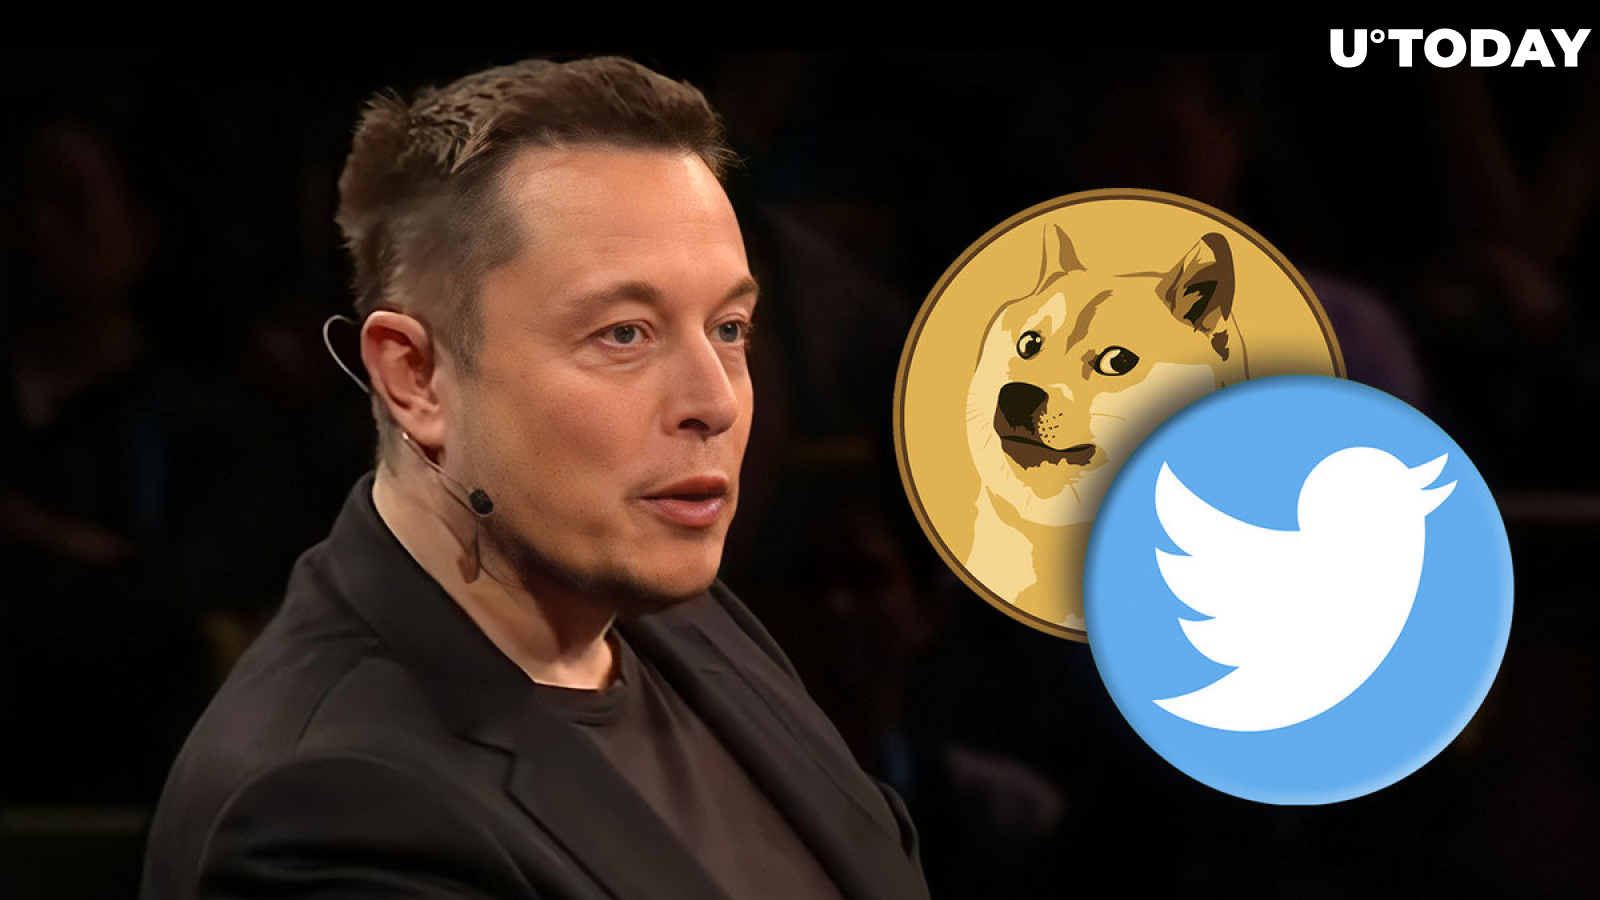 Elon Musk Responds to Dogecoin Co-Founder on Twitter, DOGE Price Suddenly Jumps 5%